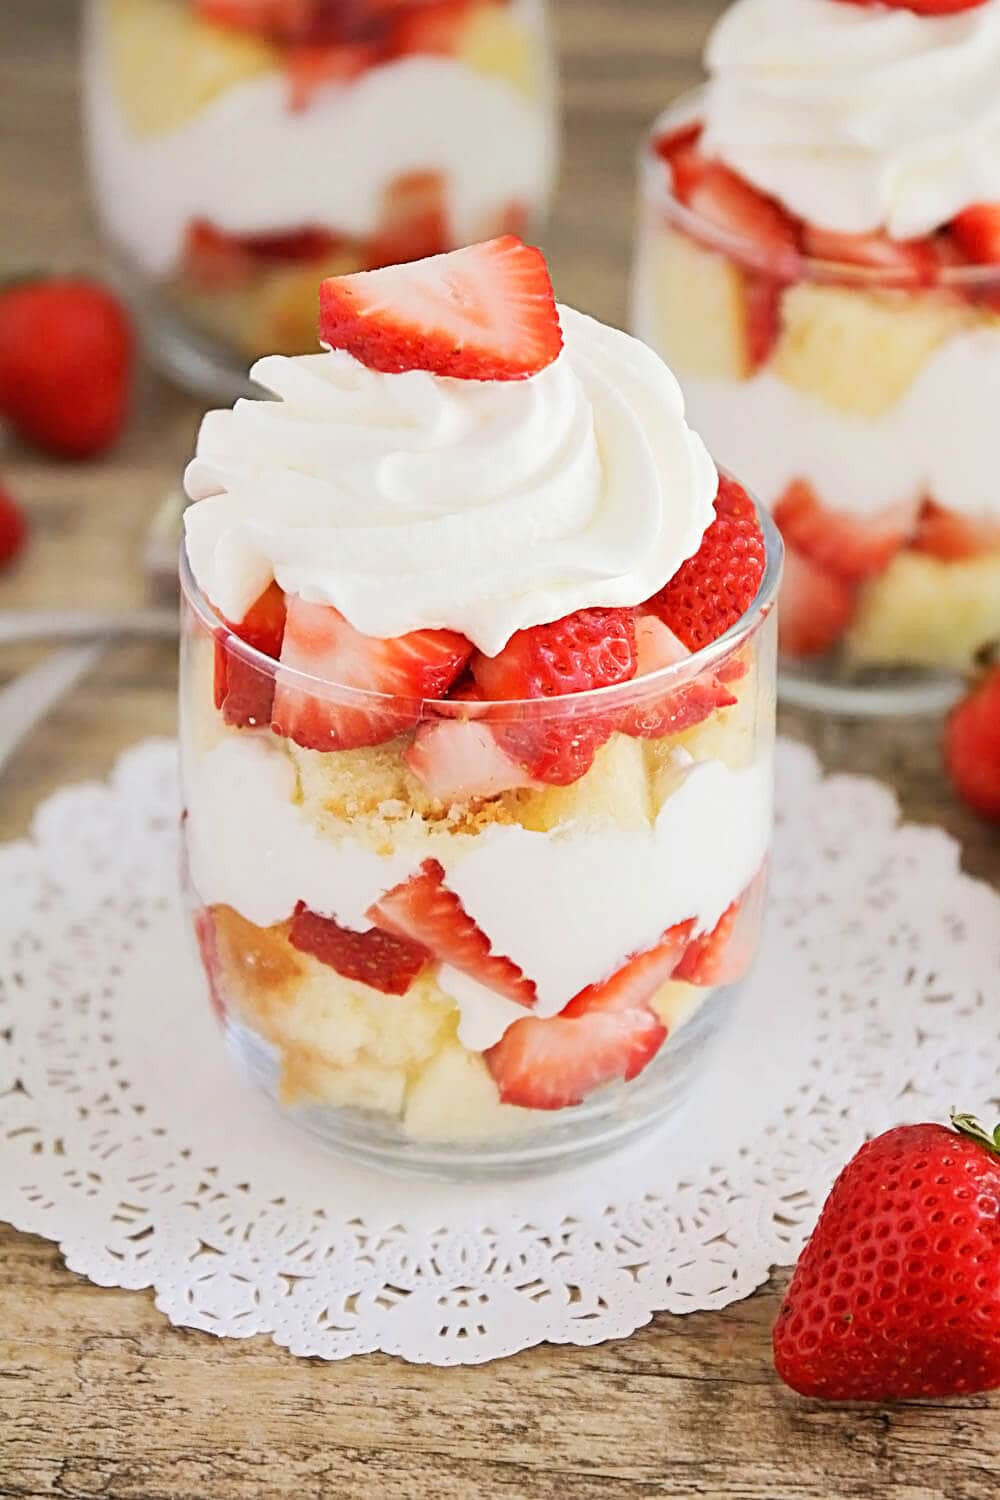 Summertime Desserts For A Crowd
 EASY Strawberry Shortcake Trifle I Heart Nap Time